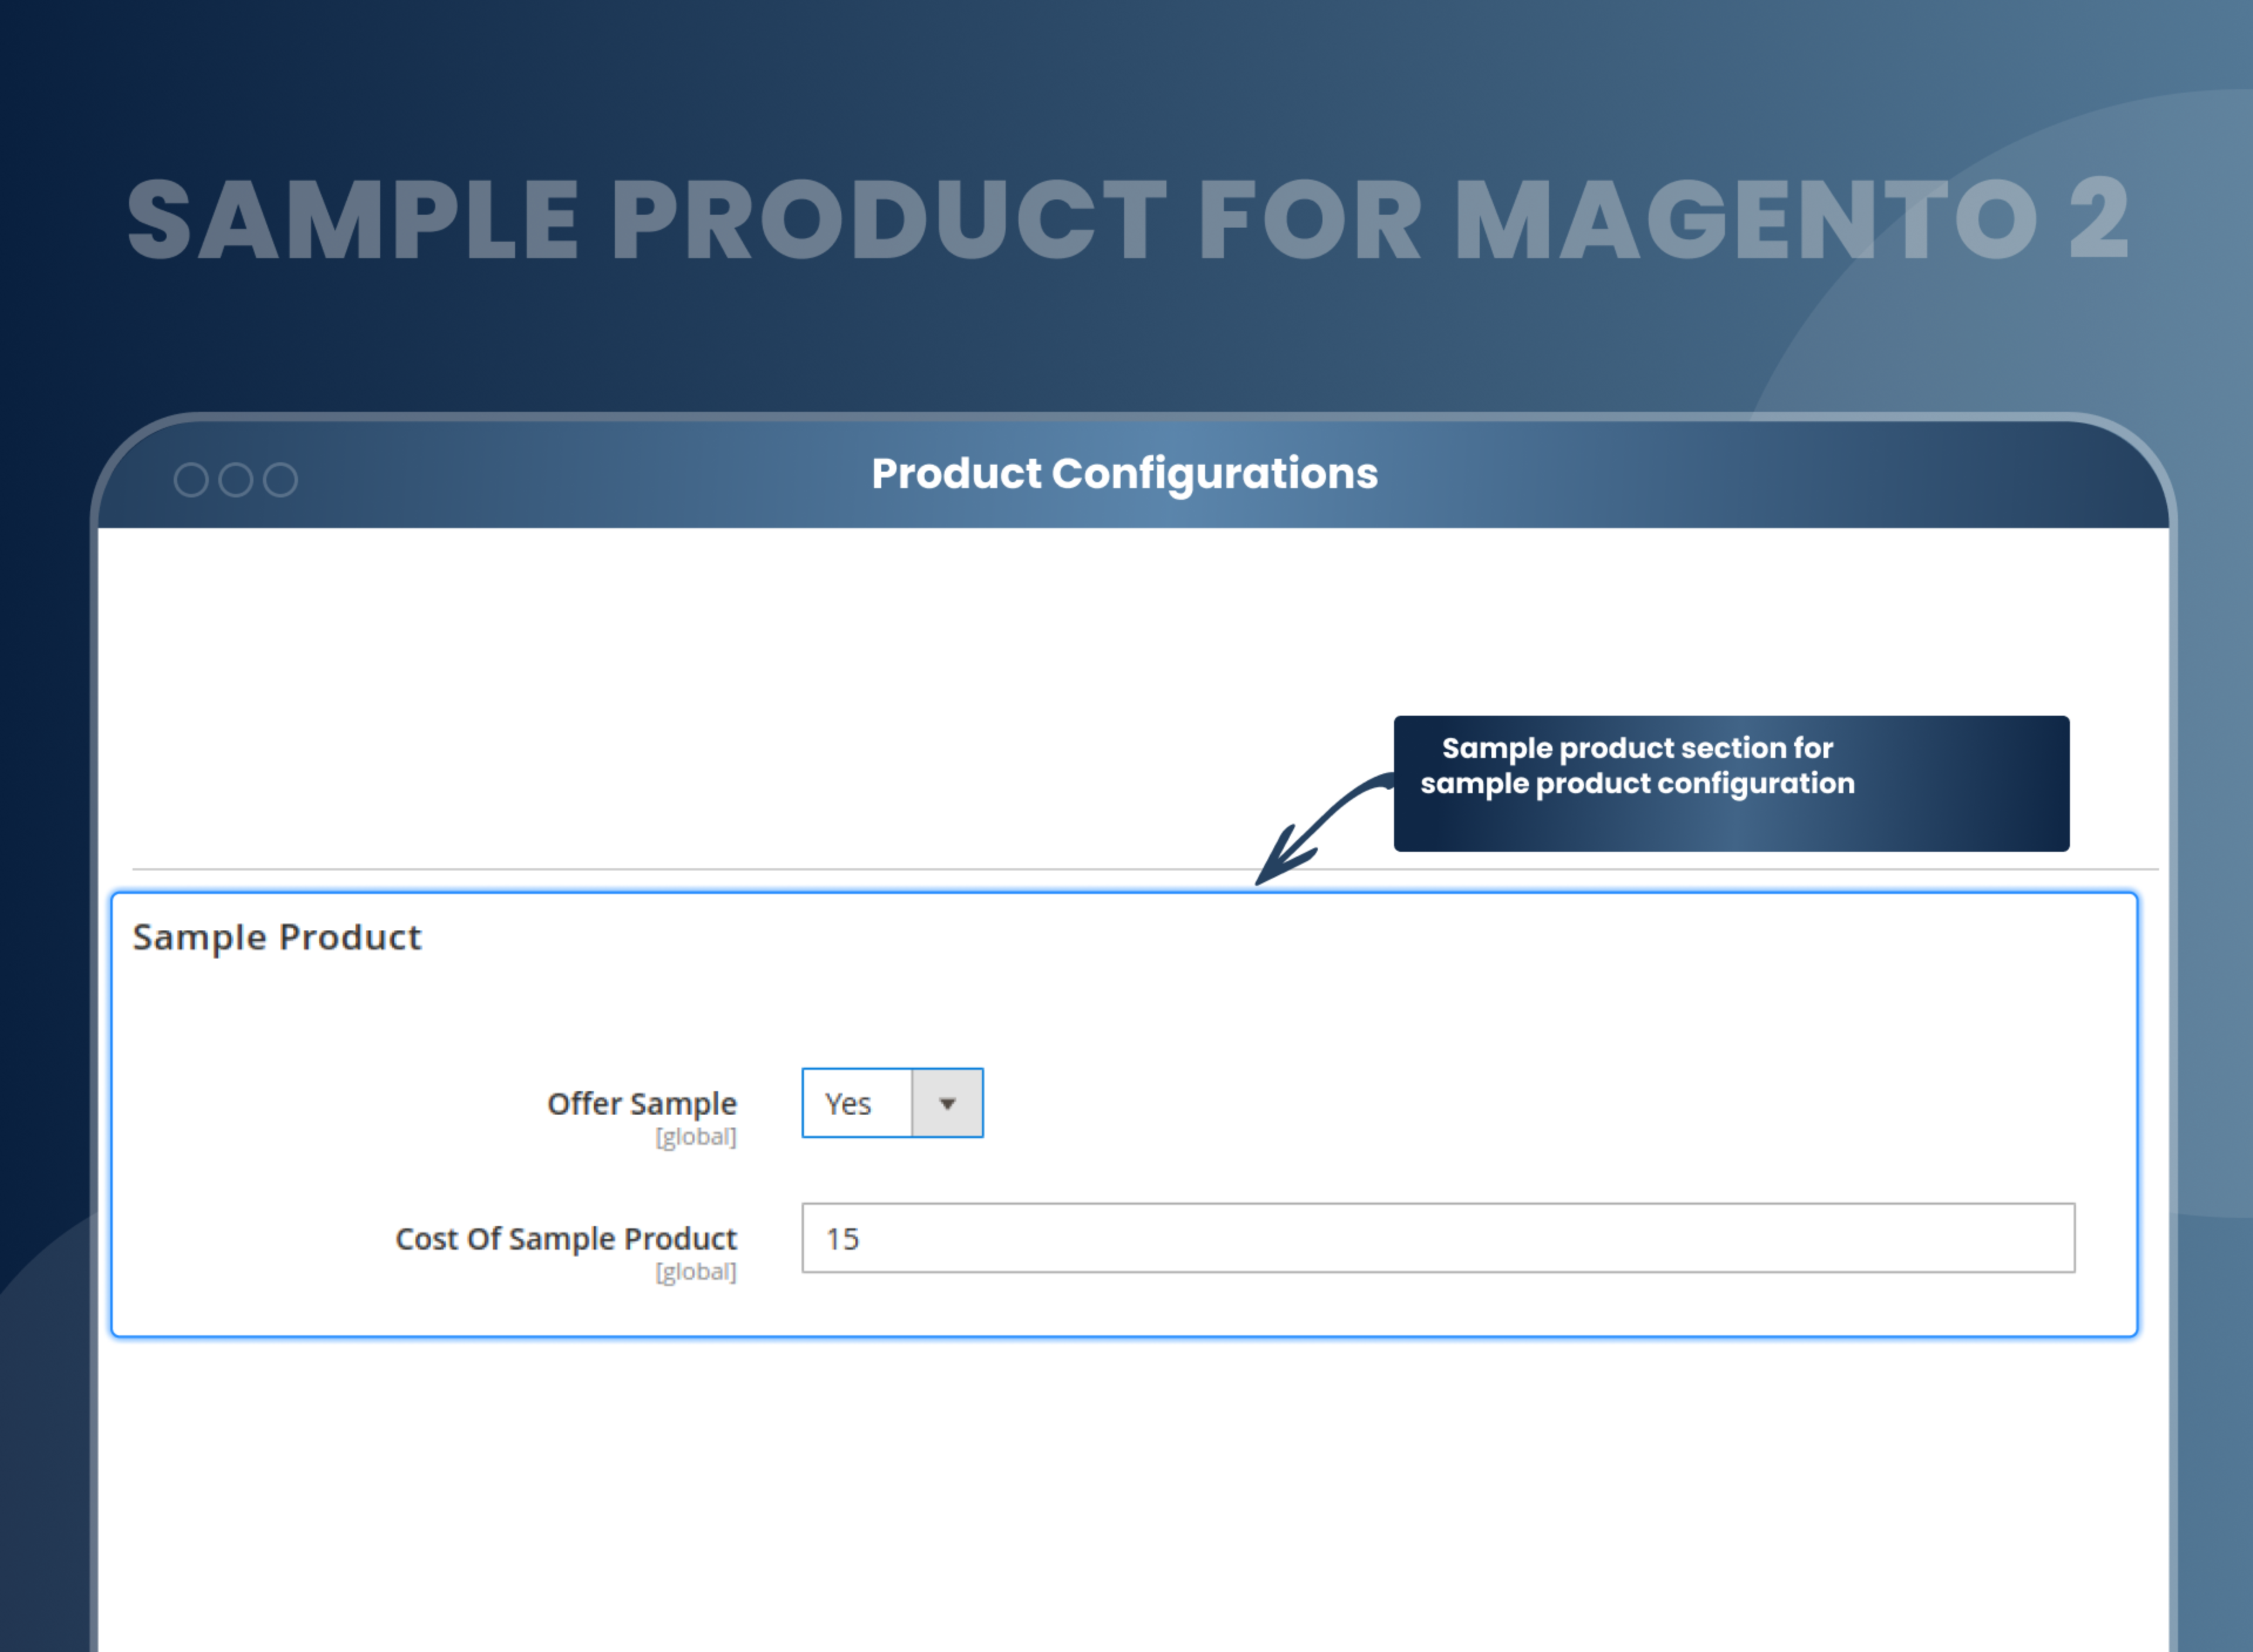 Product Configurations